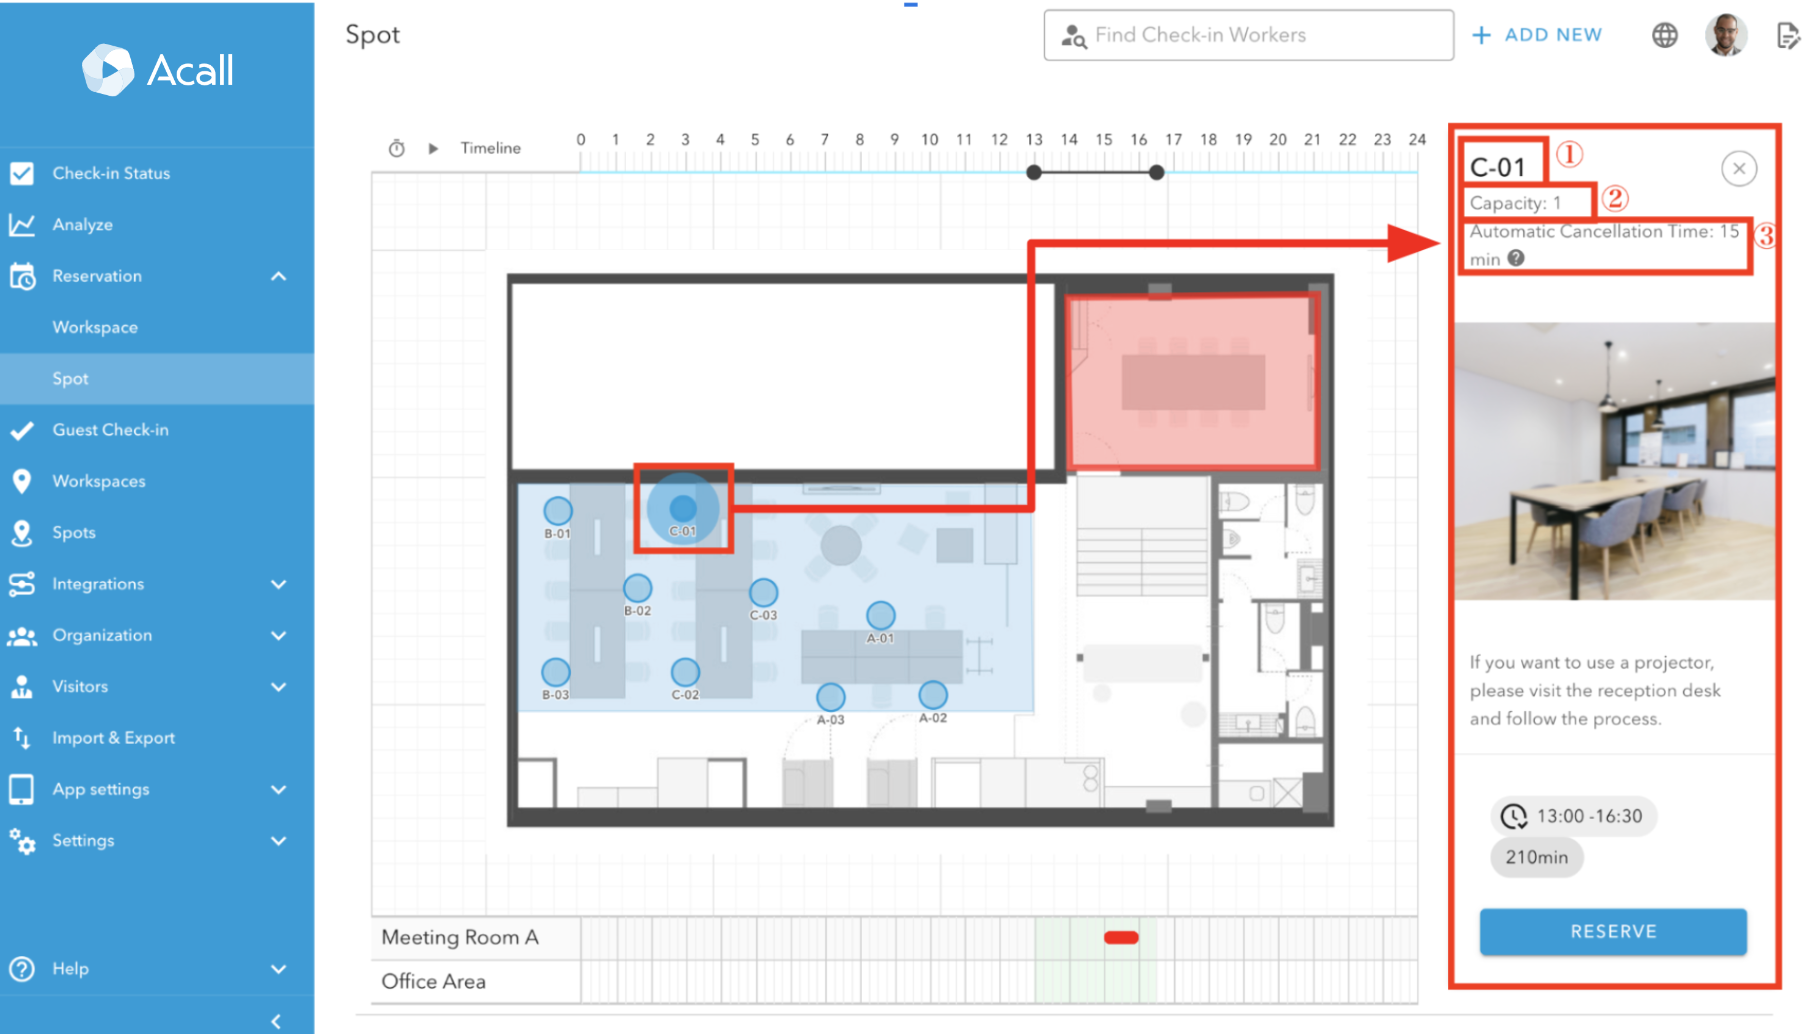 Reserve Your Spot on Floor Map on Acall Portal7.png